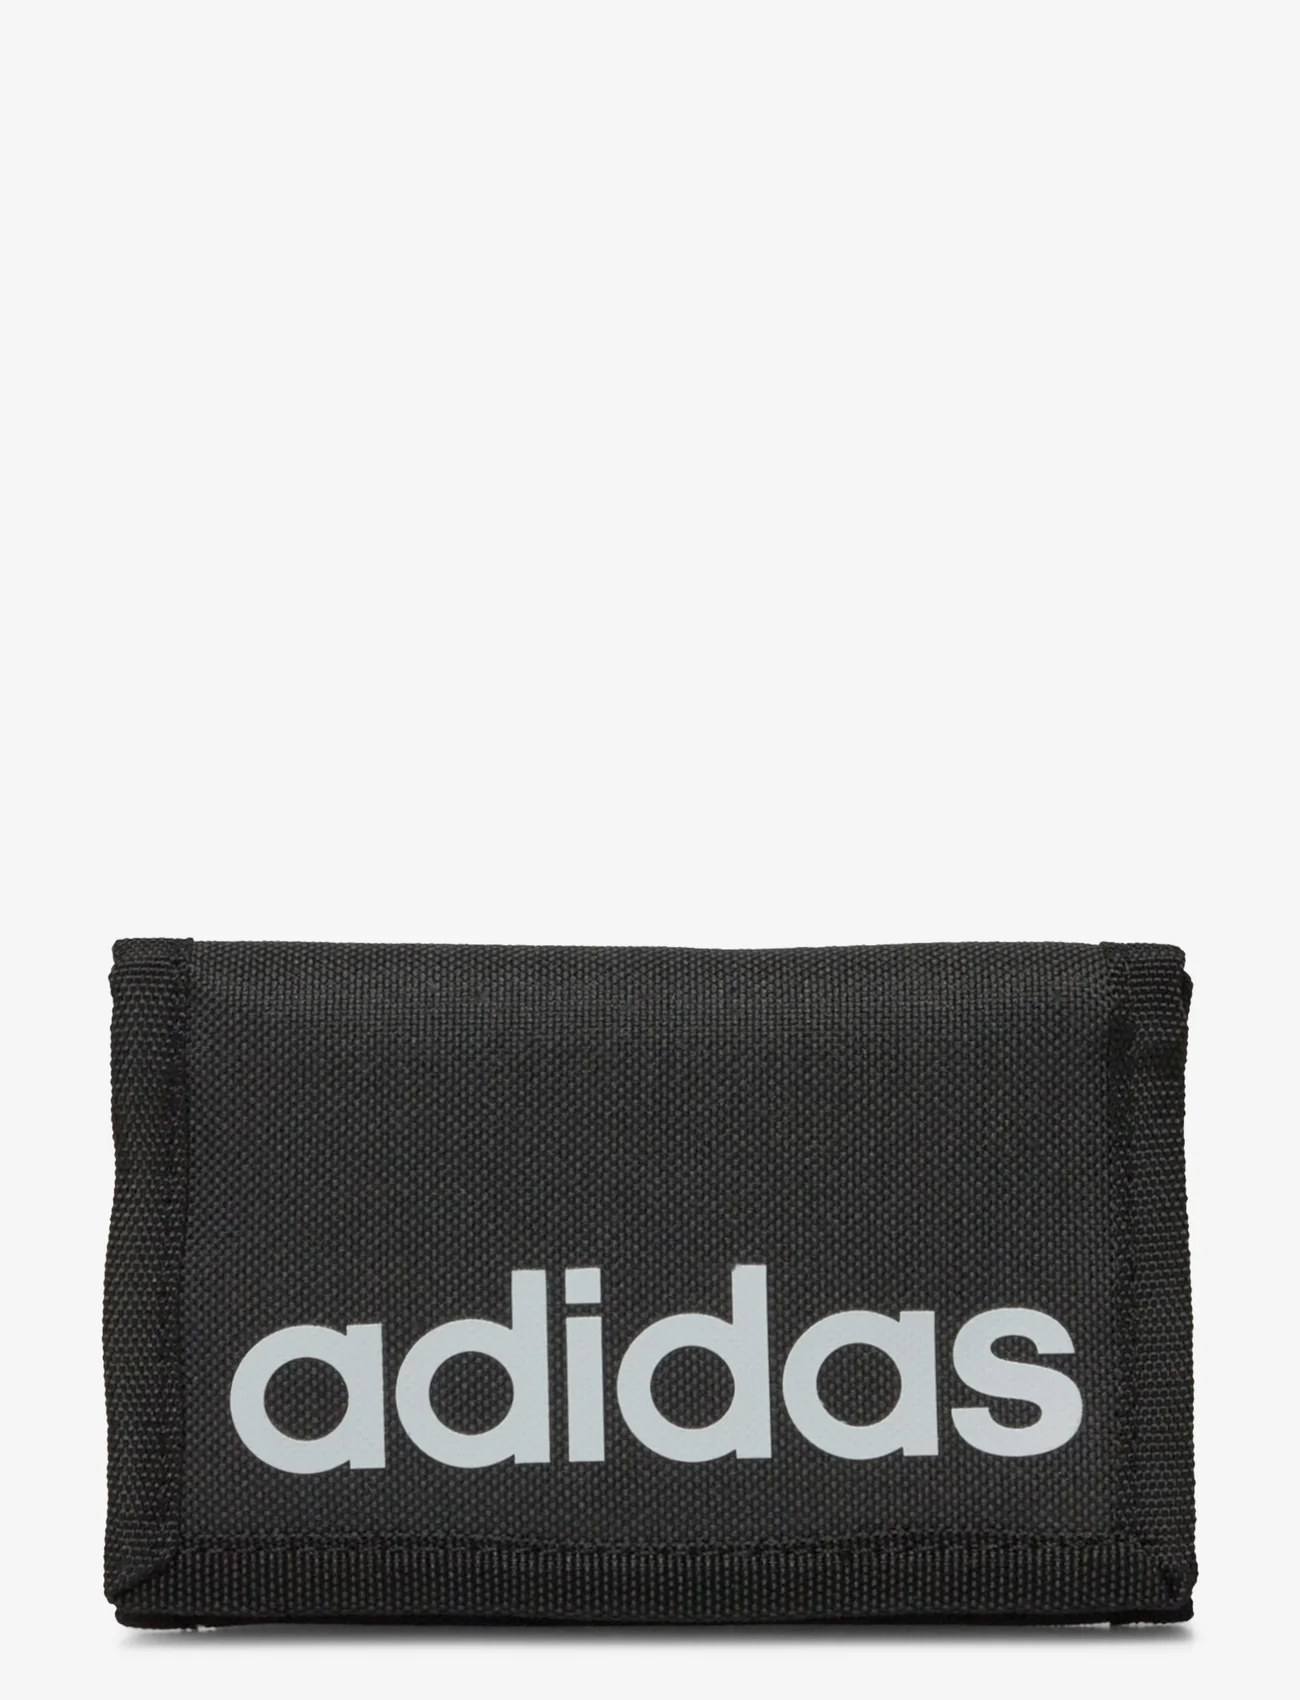 adidas Performance - LINEAR WALLET - lowest prices - black/white - 0